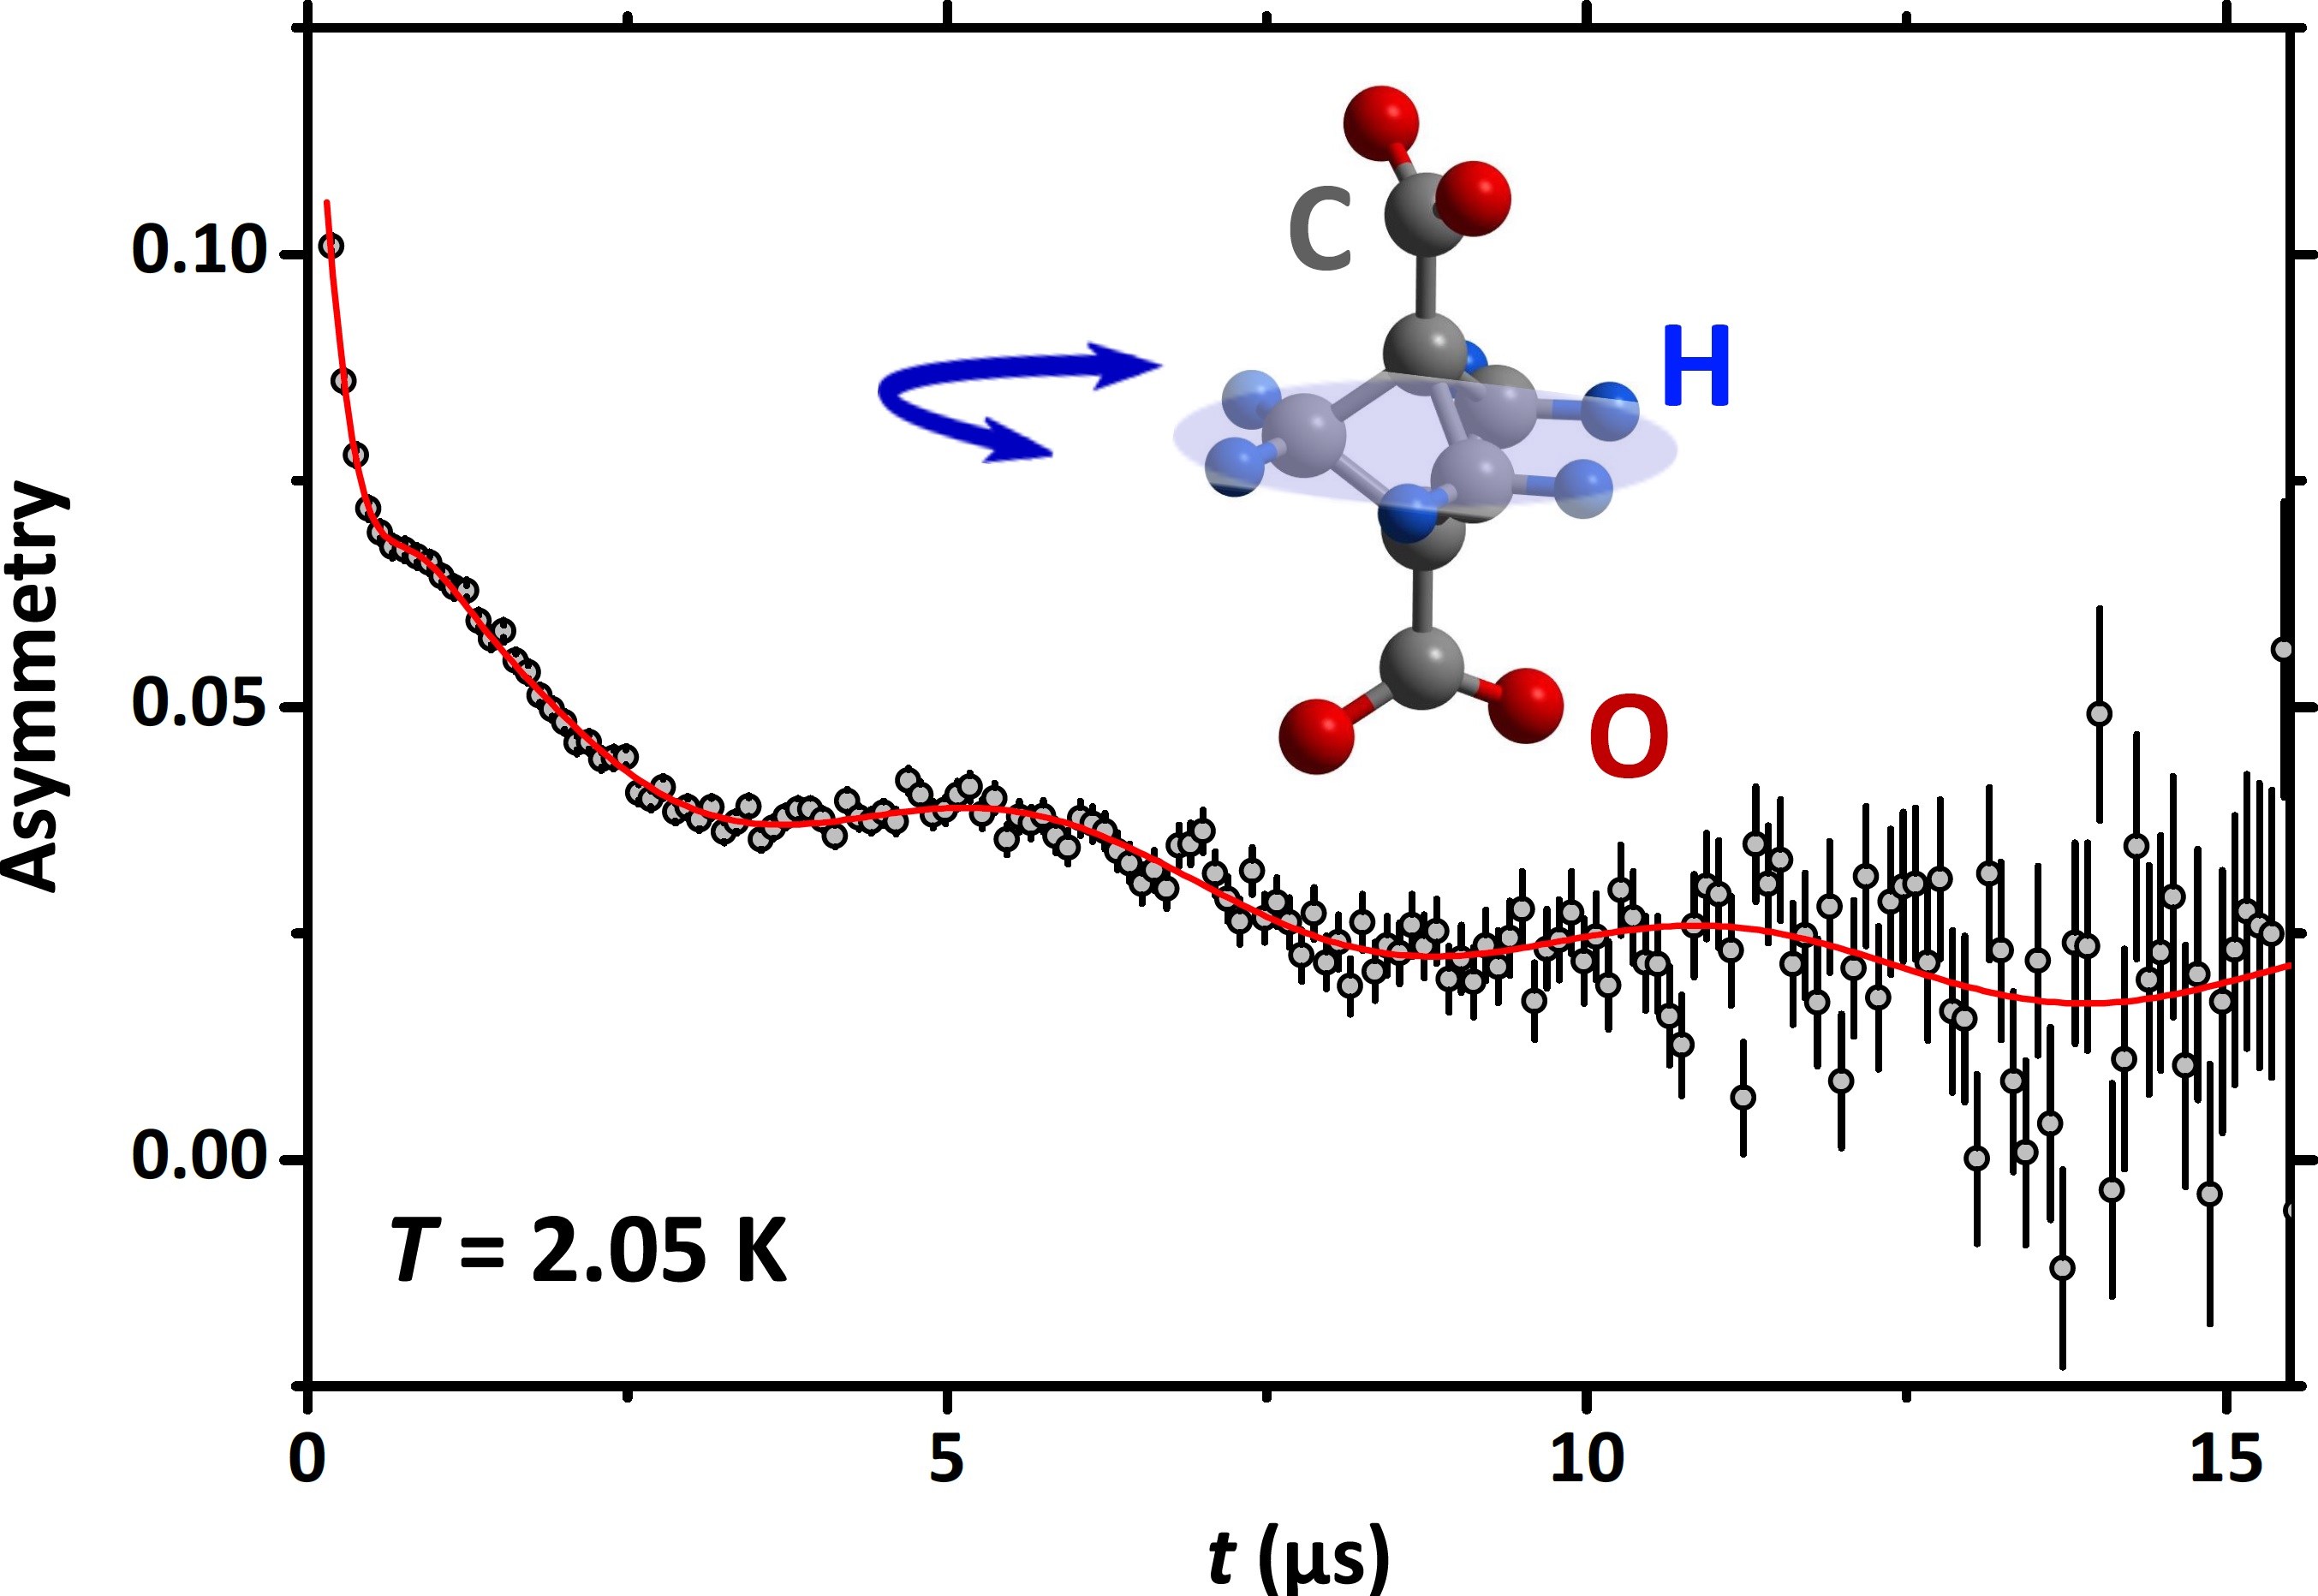 Evidence of a H-$\mu$-like state on the rotating moiety at low temperatures.